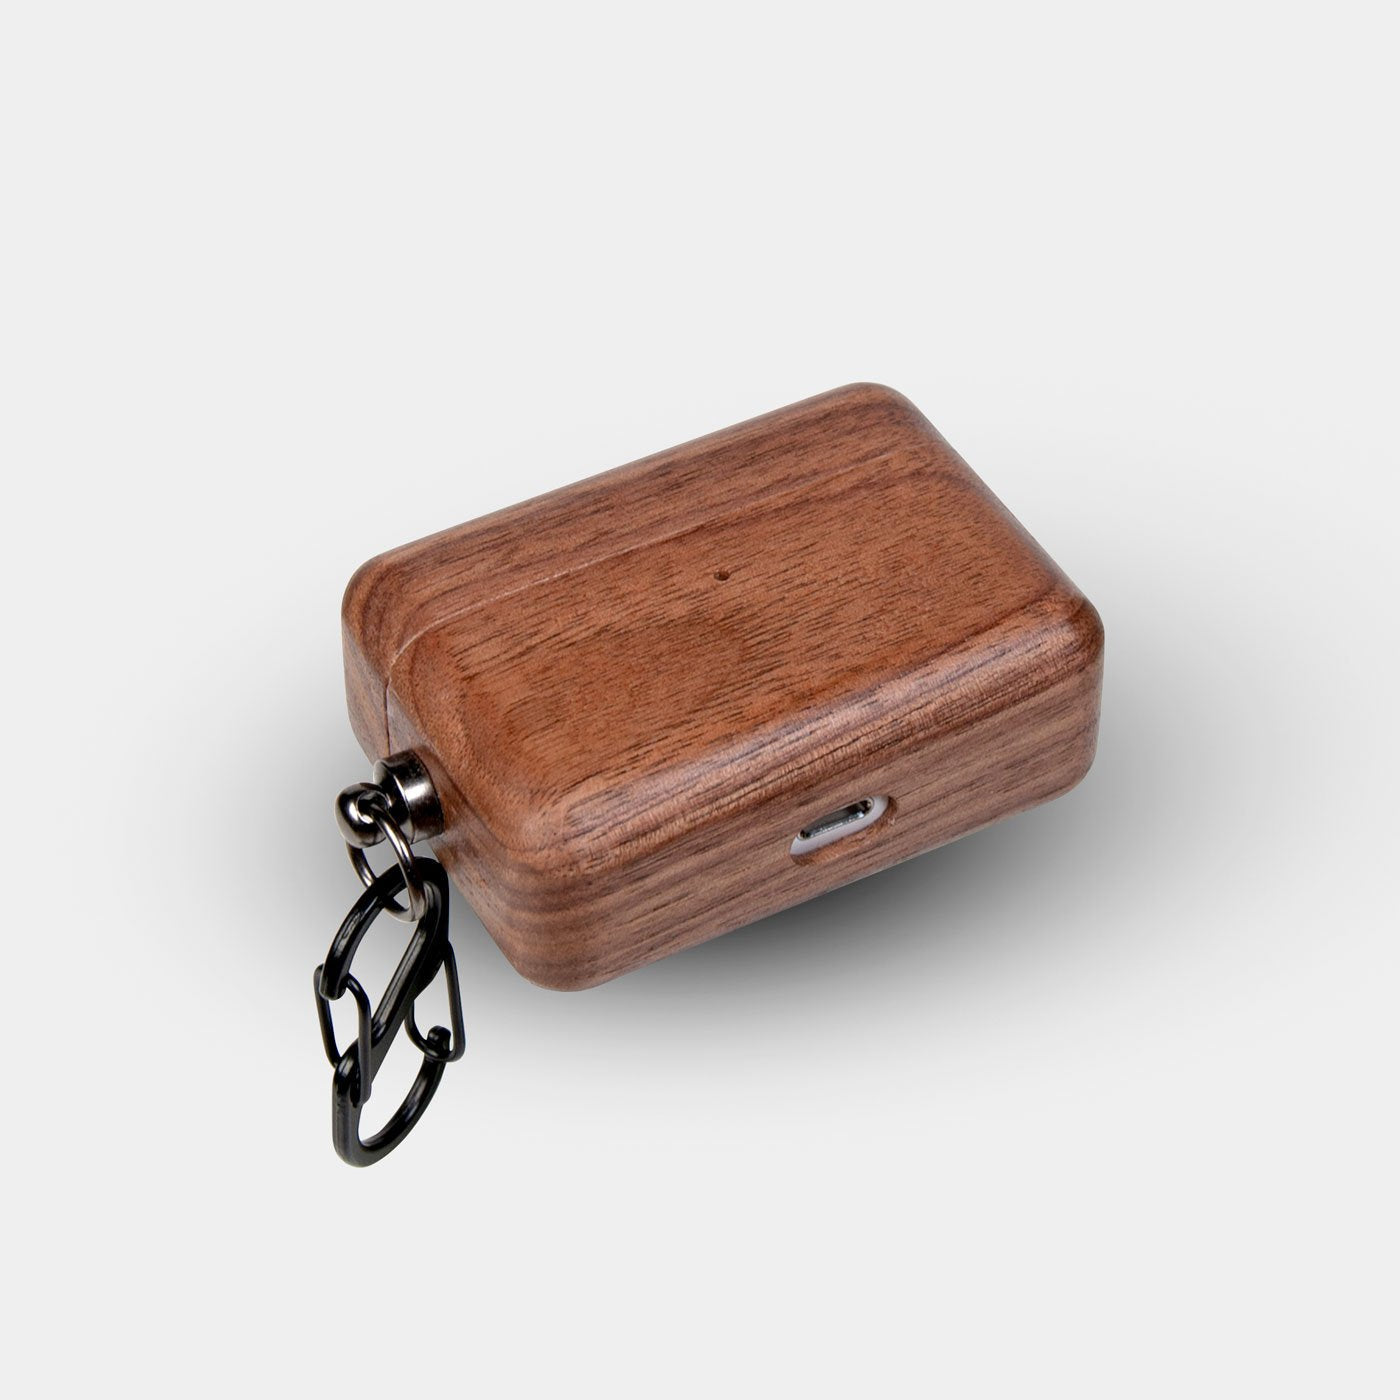 Custom Los Angeles FC AirPods Cases | AirPods | AirPods Pro - Carved Wood Los Angeles FC AirPods Cover